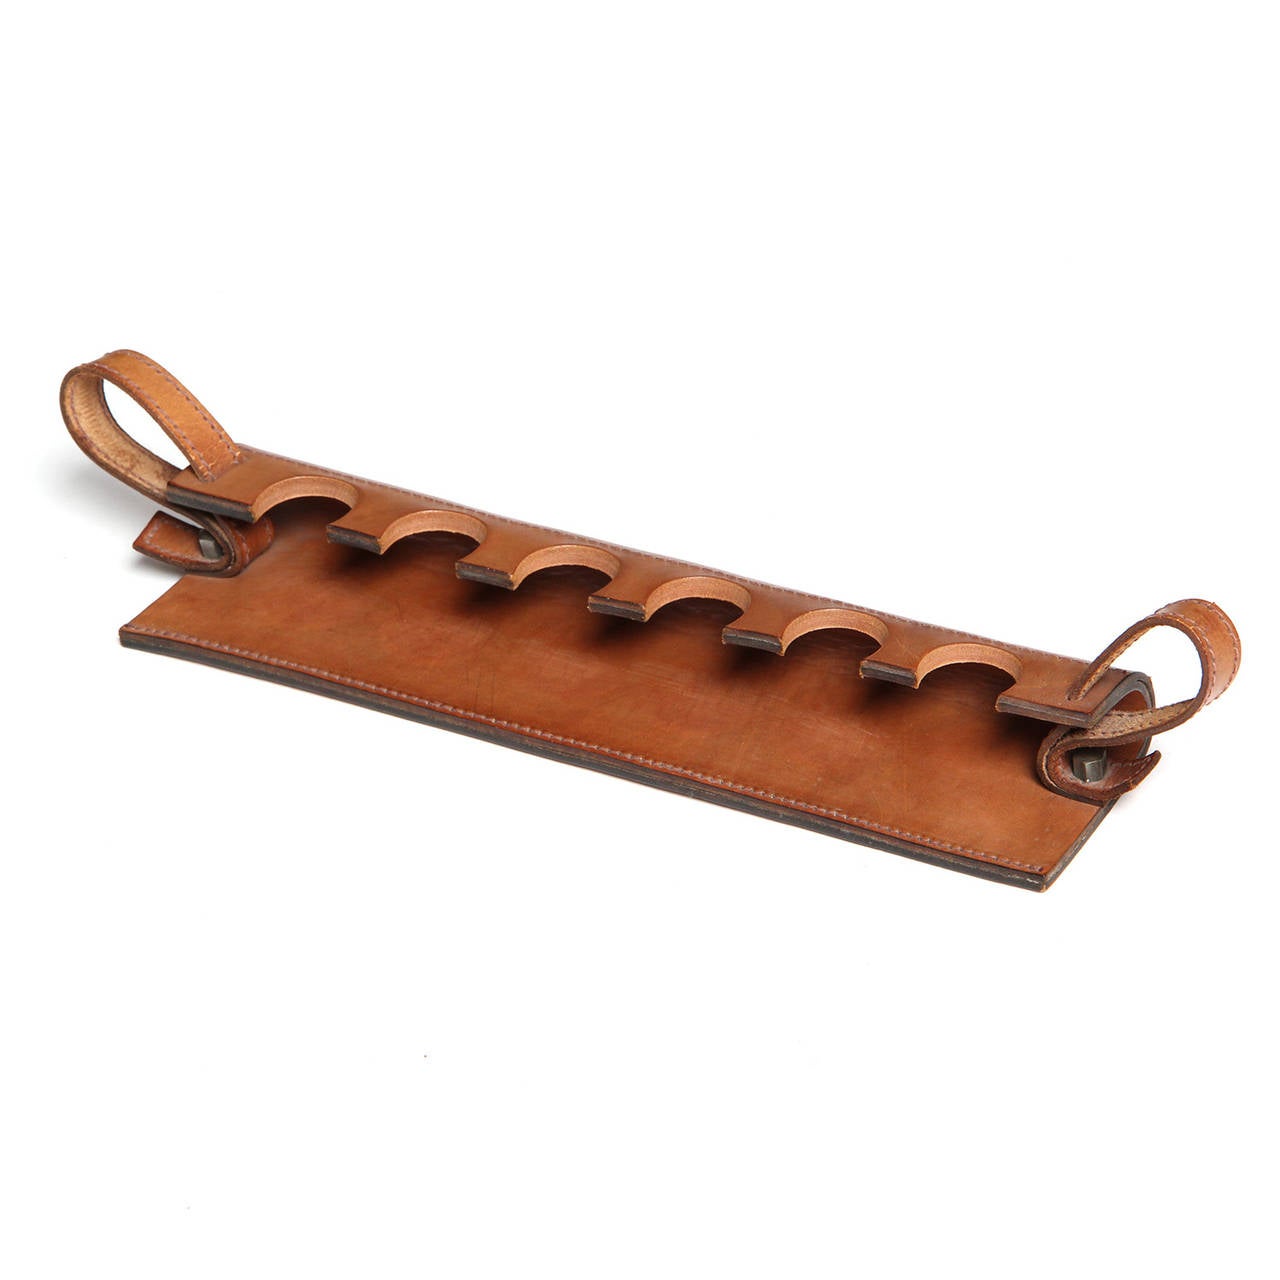 Saddle Leather Pipe Cradle In Good Condition For Sale In Sagaponack, NY